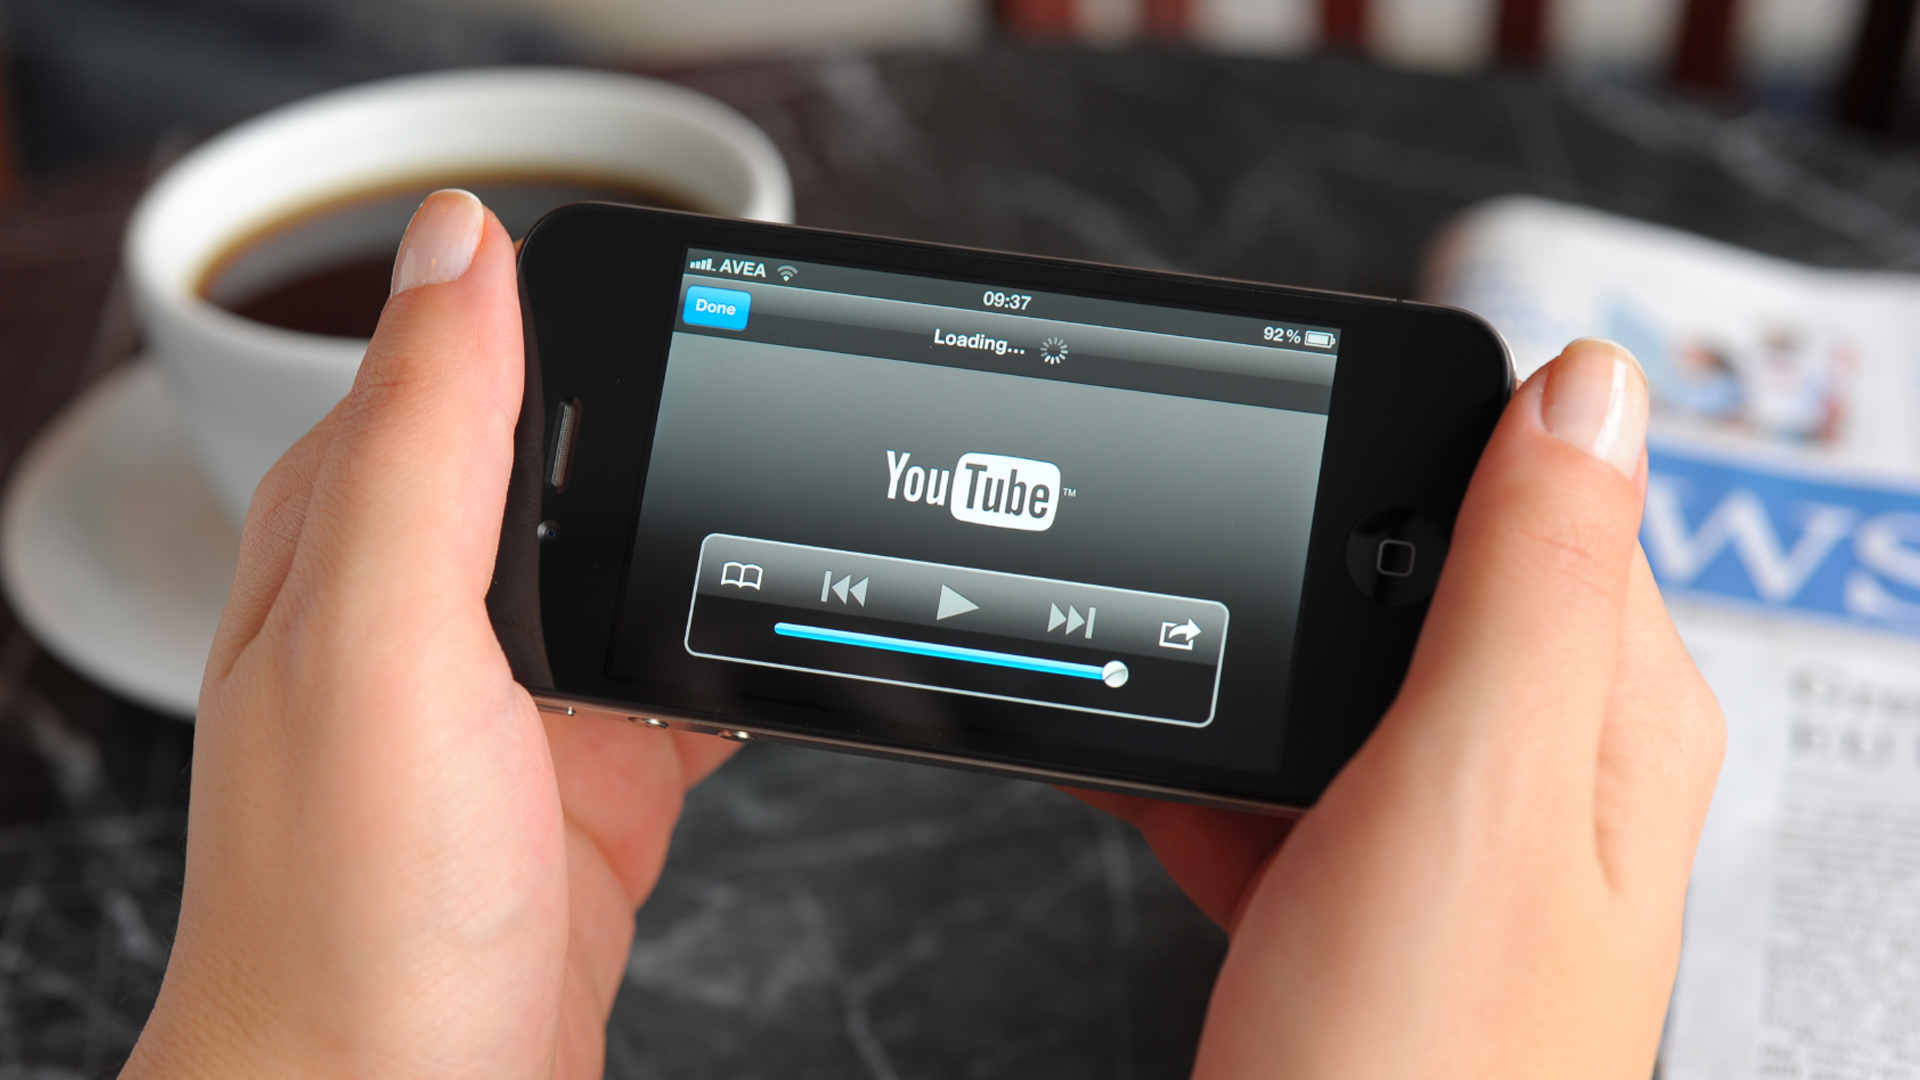 Mobile Video is the Champion! Visit http://www.myrender.com to Learn More!